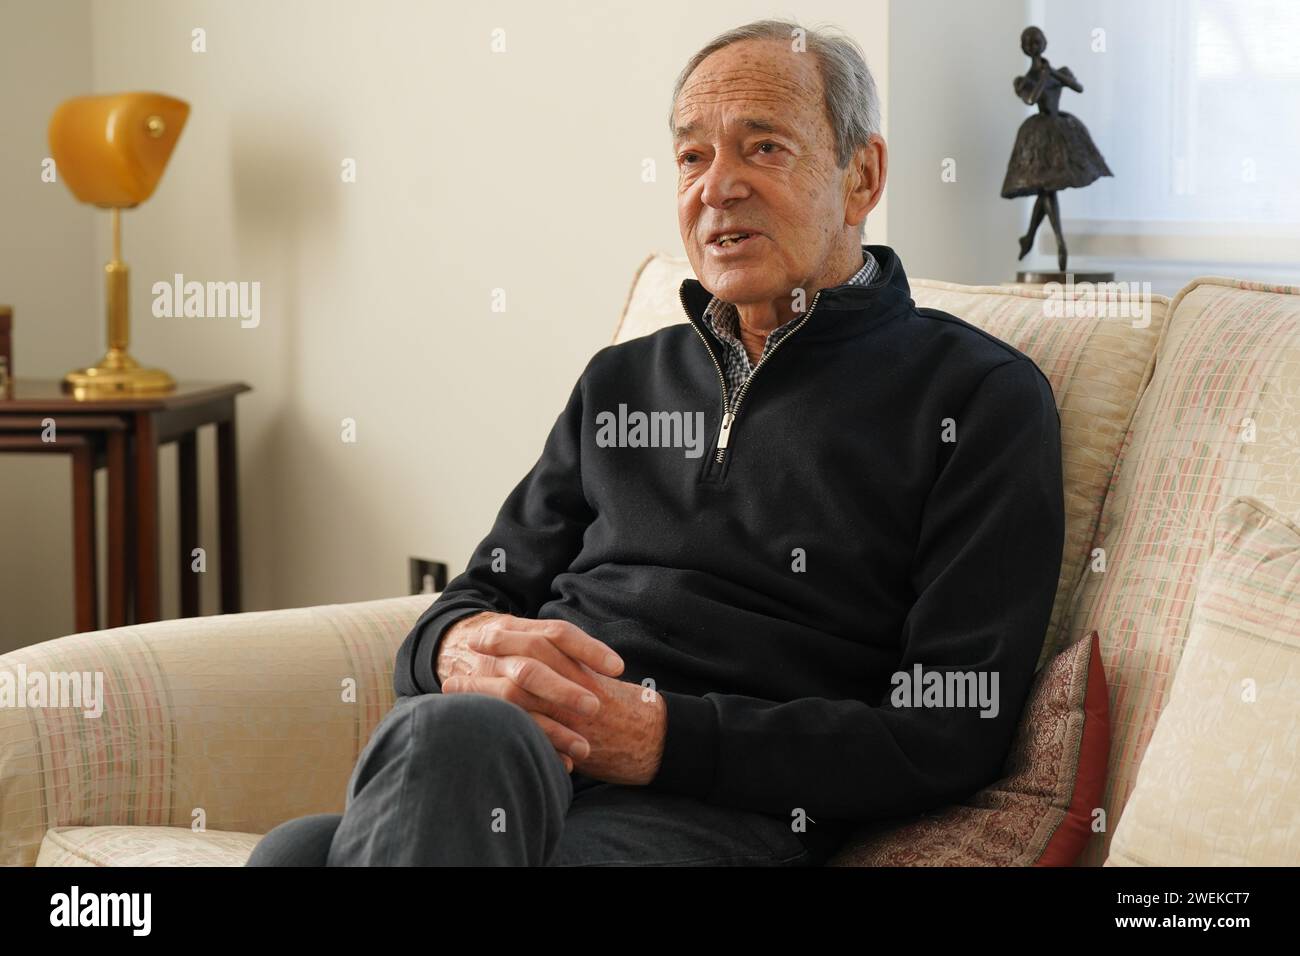 Holocaust survivor Ivan Shaw at his home in north London, ahead of Holocaust Memorial Day. Ivan was born in 1939 in Novi Sad, Yugoslavia (now Serbia). In 1944 Germans began to round up and deport Jews, including Ivan's mother. His father went with her despite only being half-Jewish. Ivan was hidden by one of his father's sisters until his concealment was given away by a neighbour. He was then taken to prison by the Gestapo, spending the night alone in a cell aged 5, before he was moved to a transit camp where he was reunited with his family. The inmates were taken to Novi Sad train station to  Stock Photo